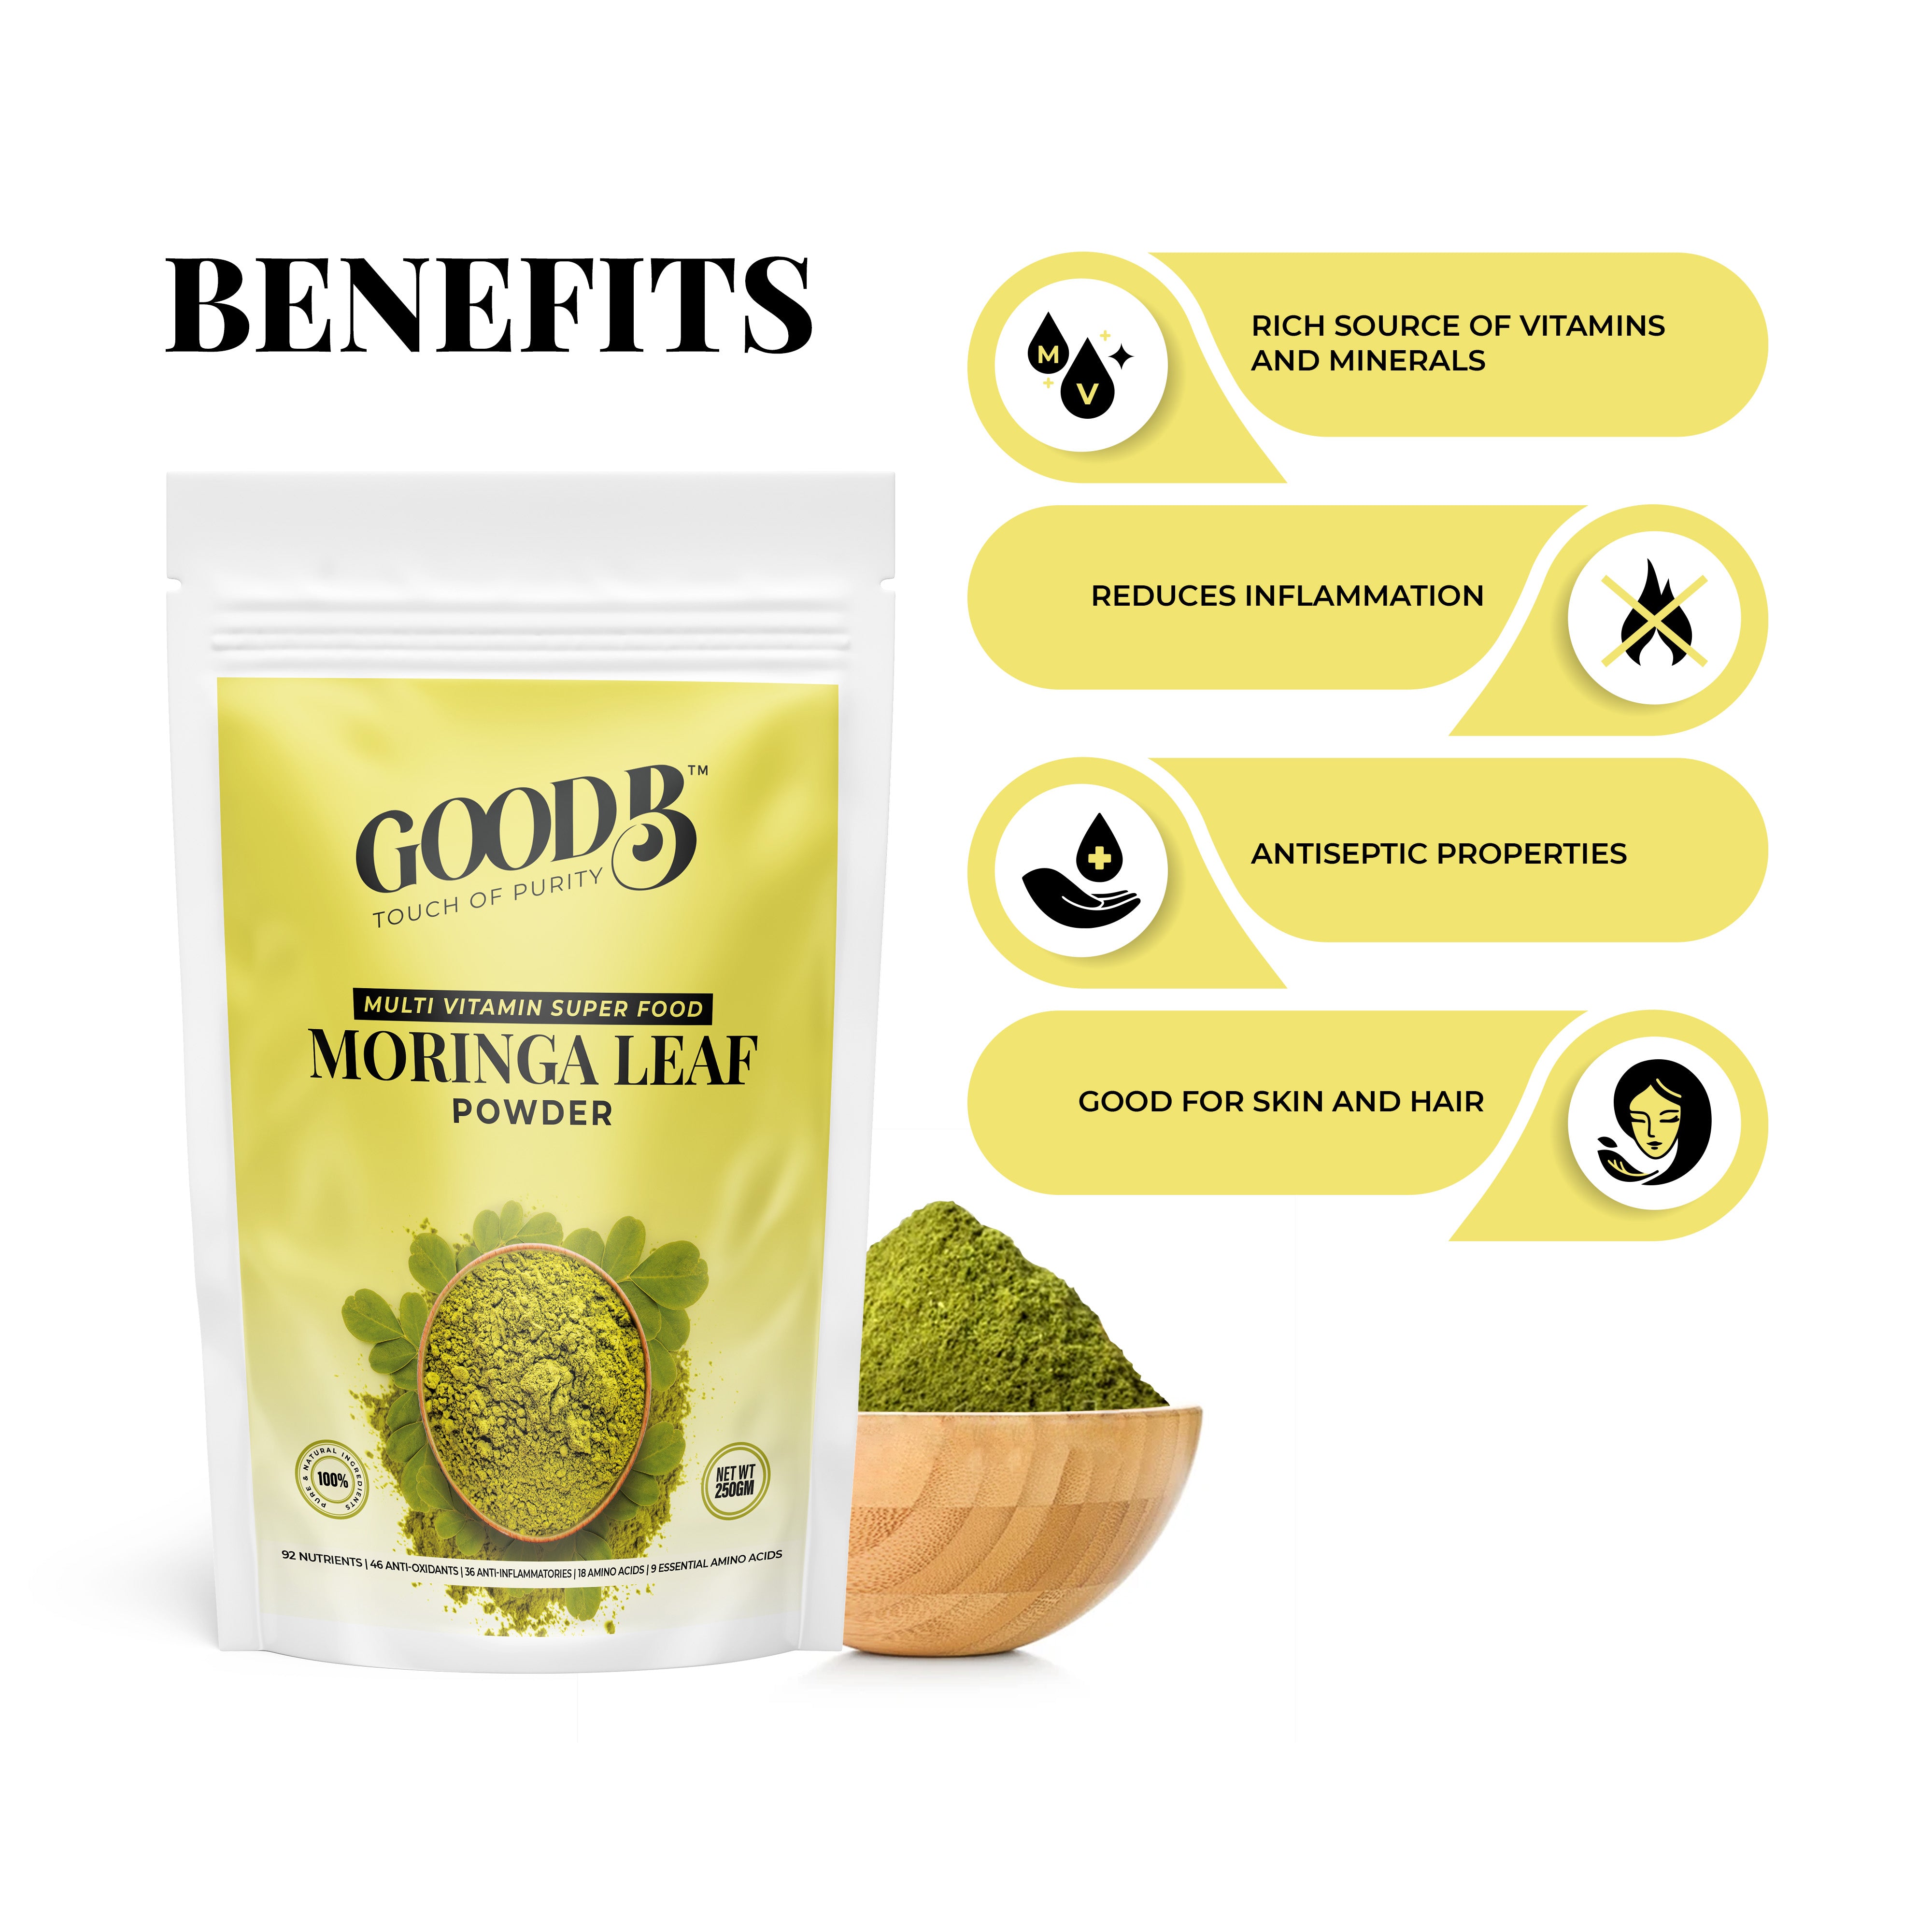 BOOSTS IMMUNITY AND DIGESTION - 250 GM